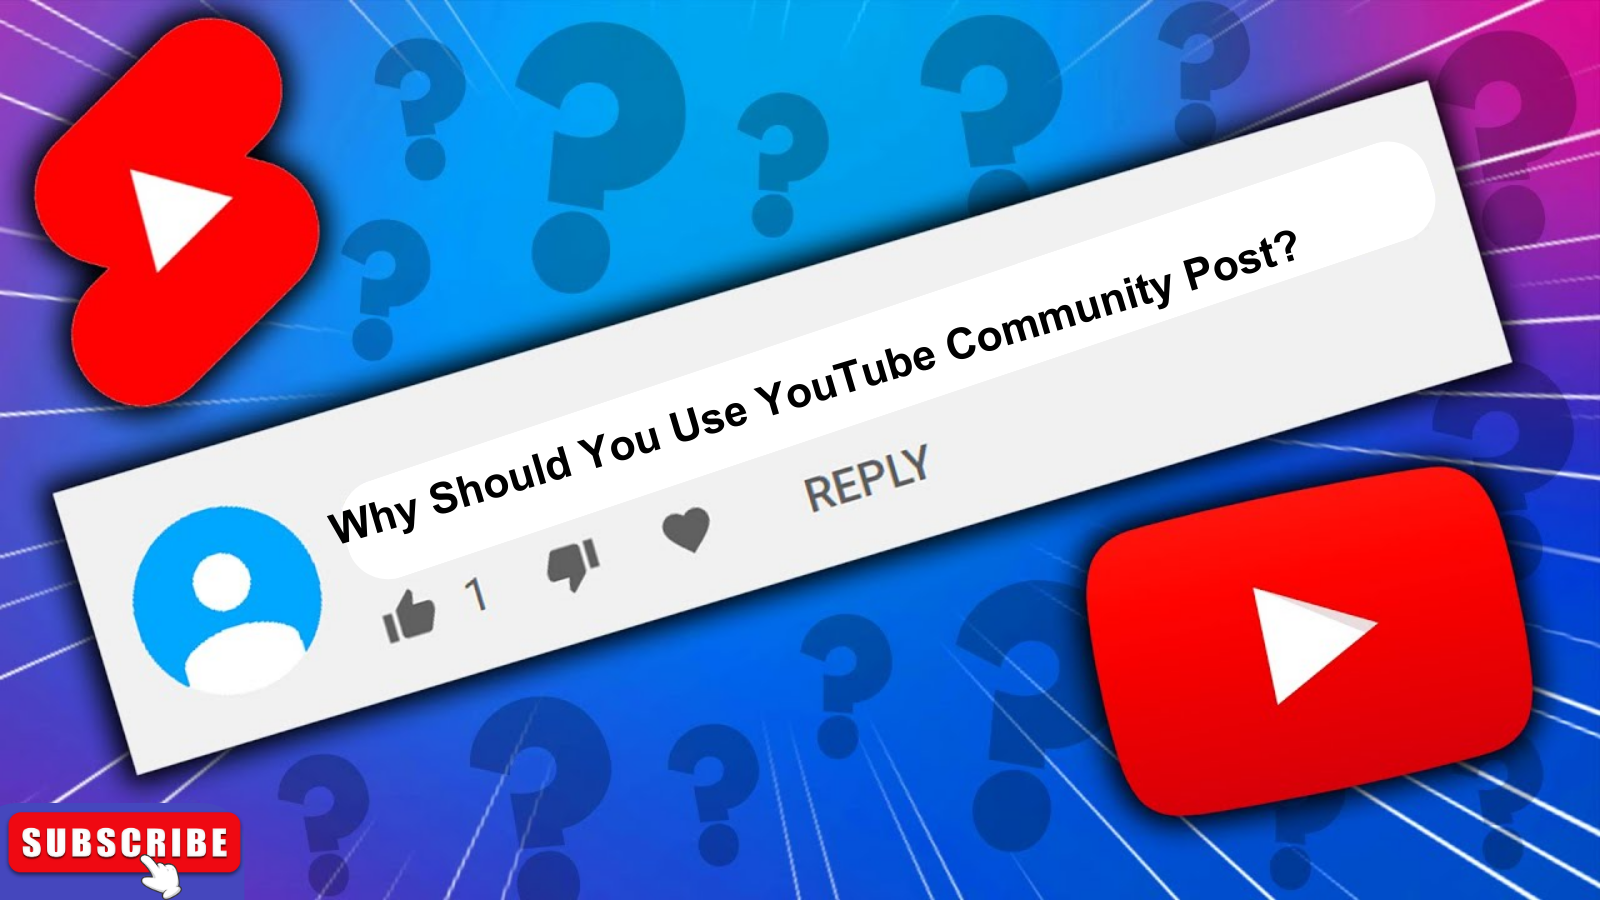 why-should-you-use-community-post-youTube?